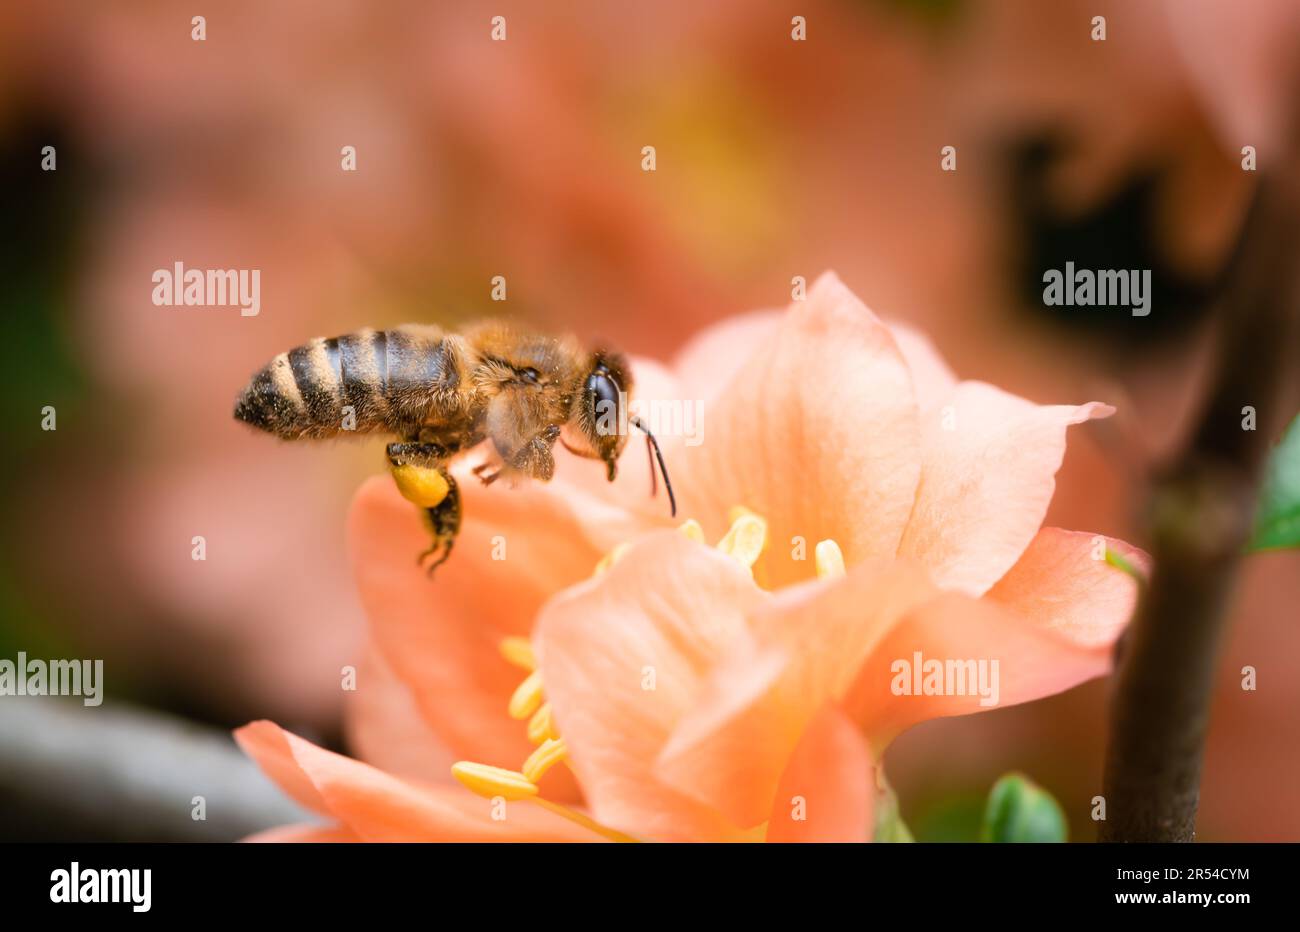 Honey bee with pollen baskets flying to forage on a peach Chaenomeles speciosa Stock Photo